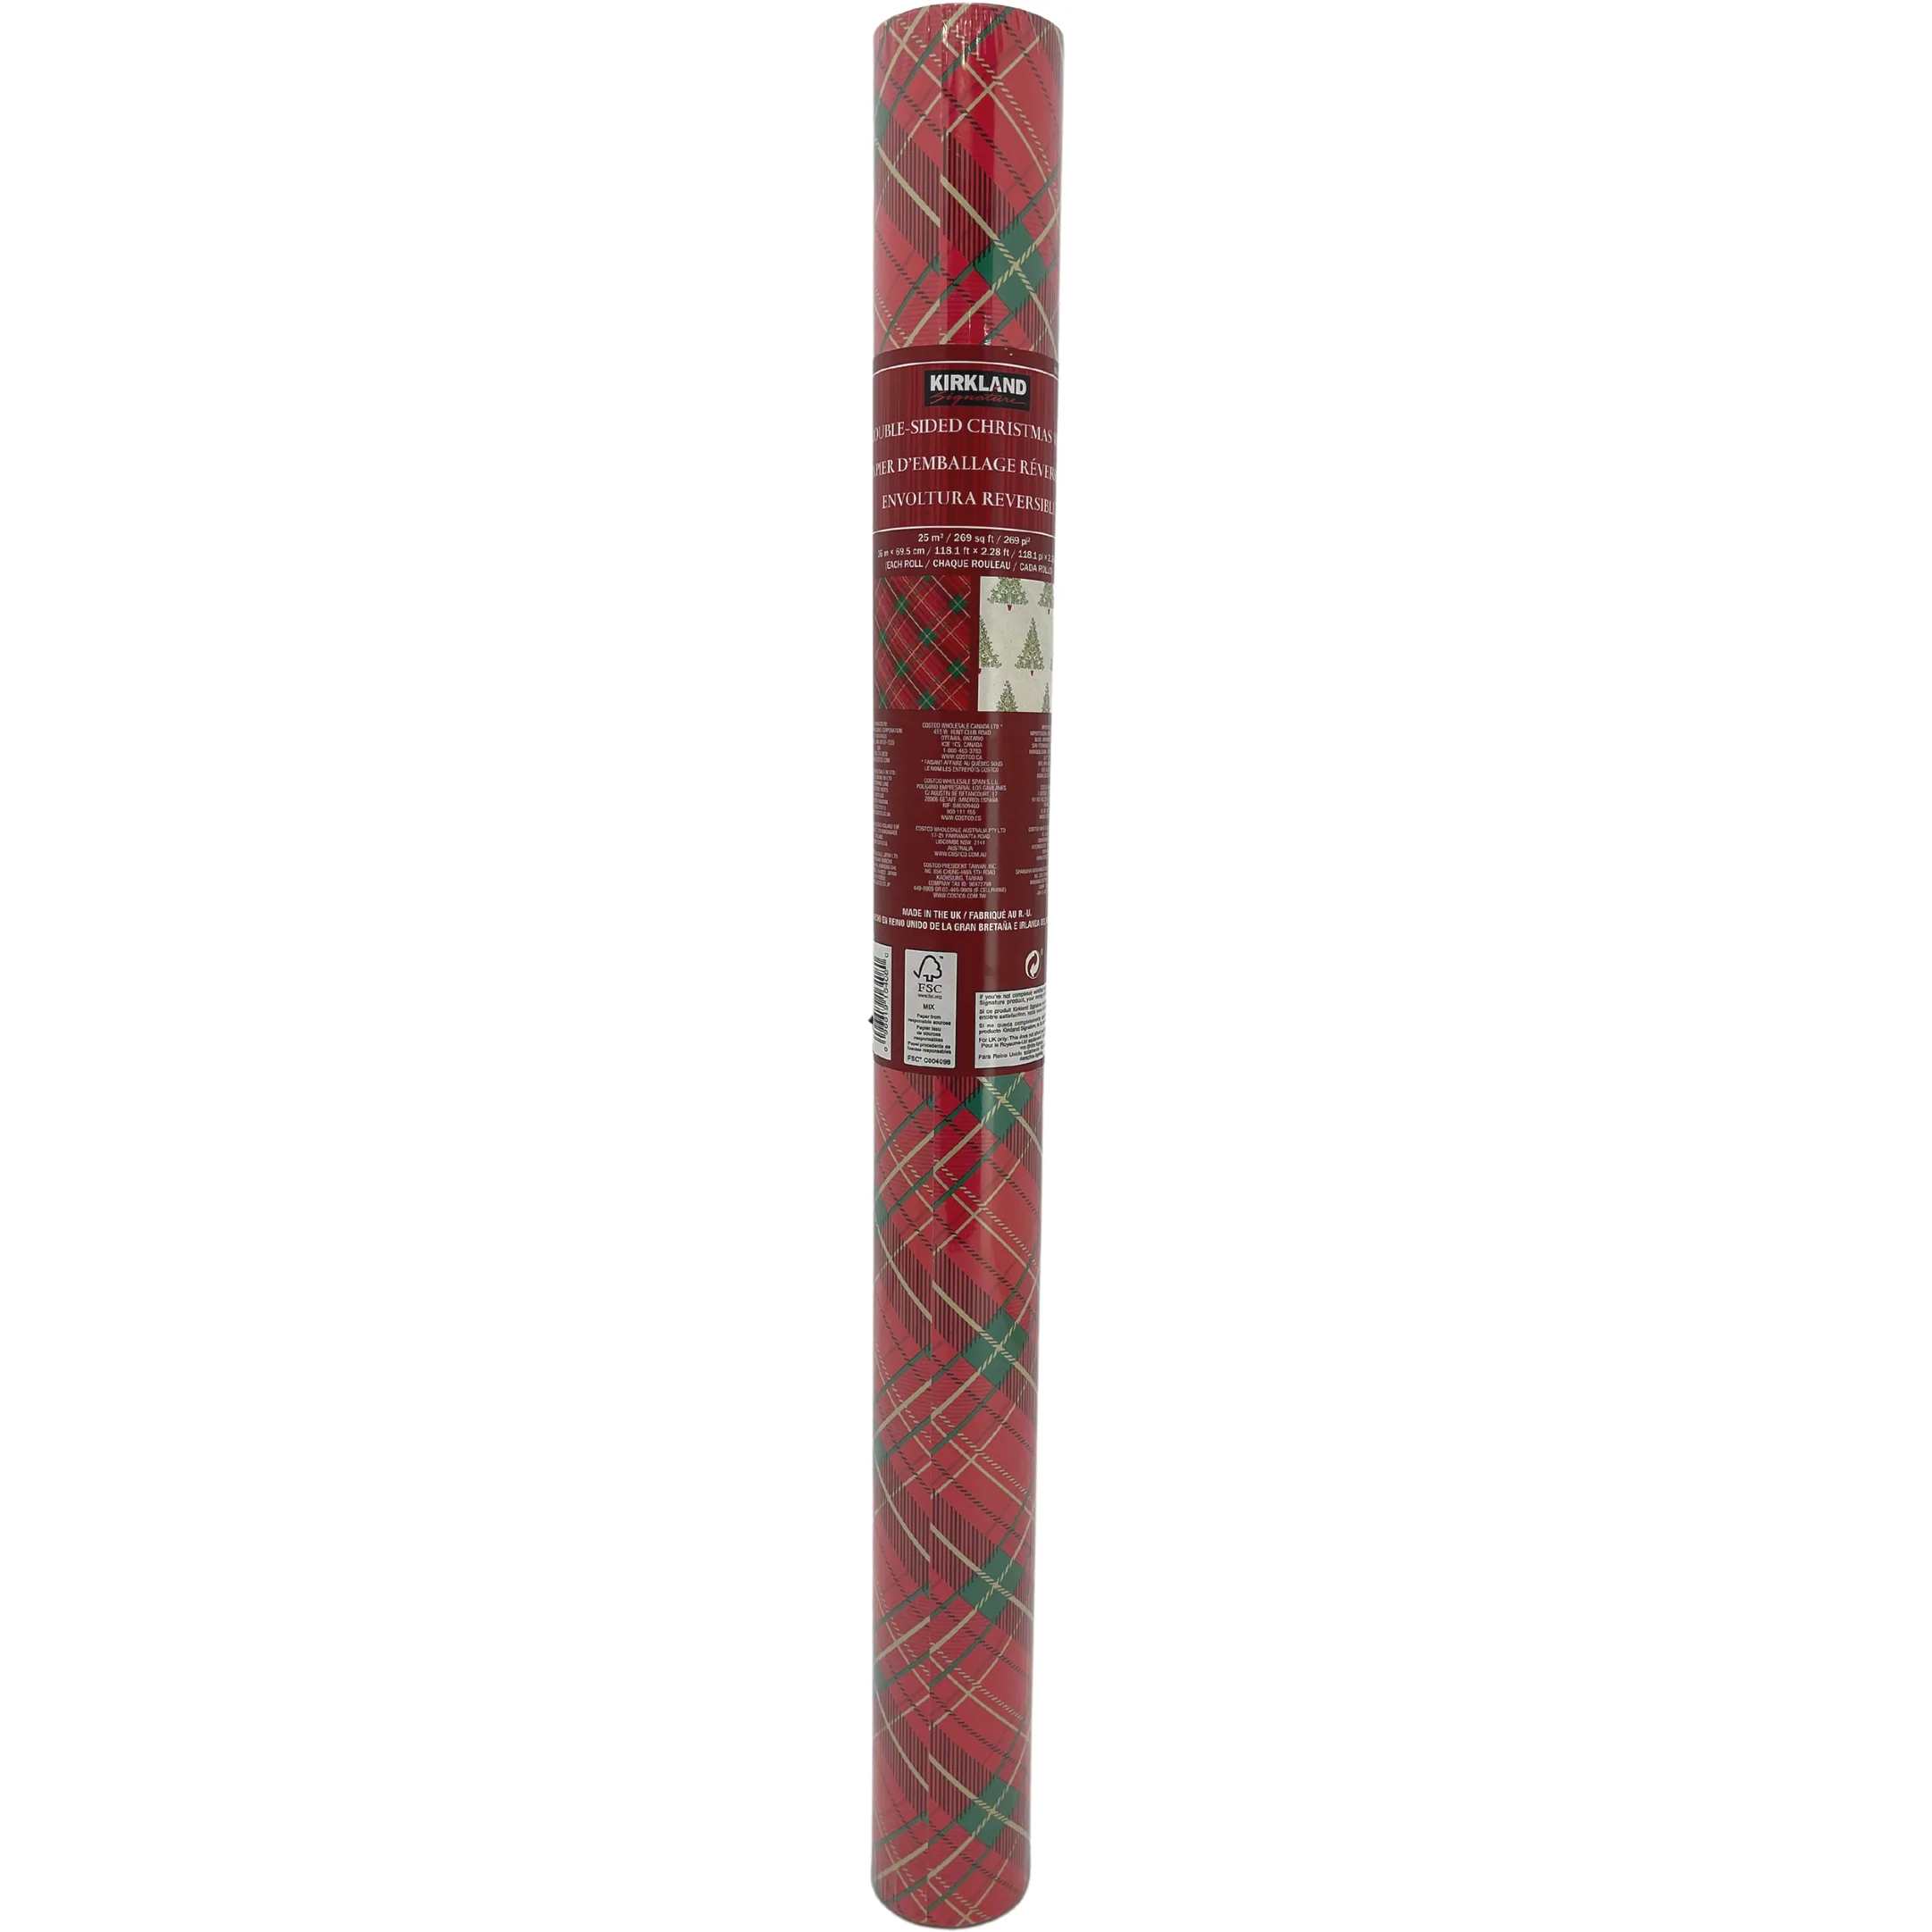 Kirkland Christmas Wrapping Paper / Holiday Wrapping Paper / Double Sided / Red & Green